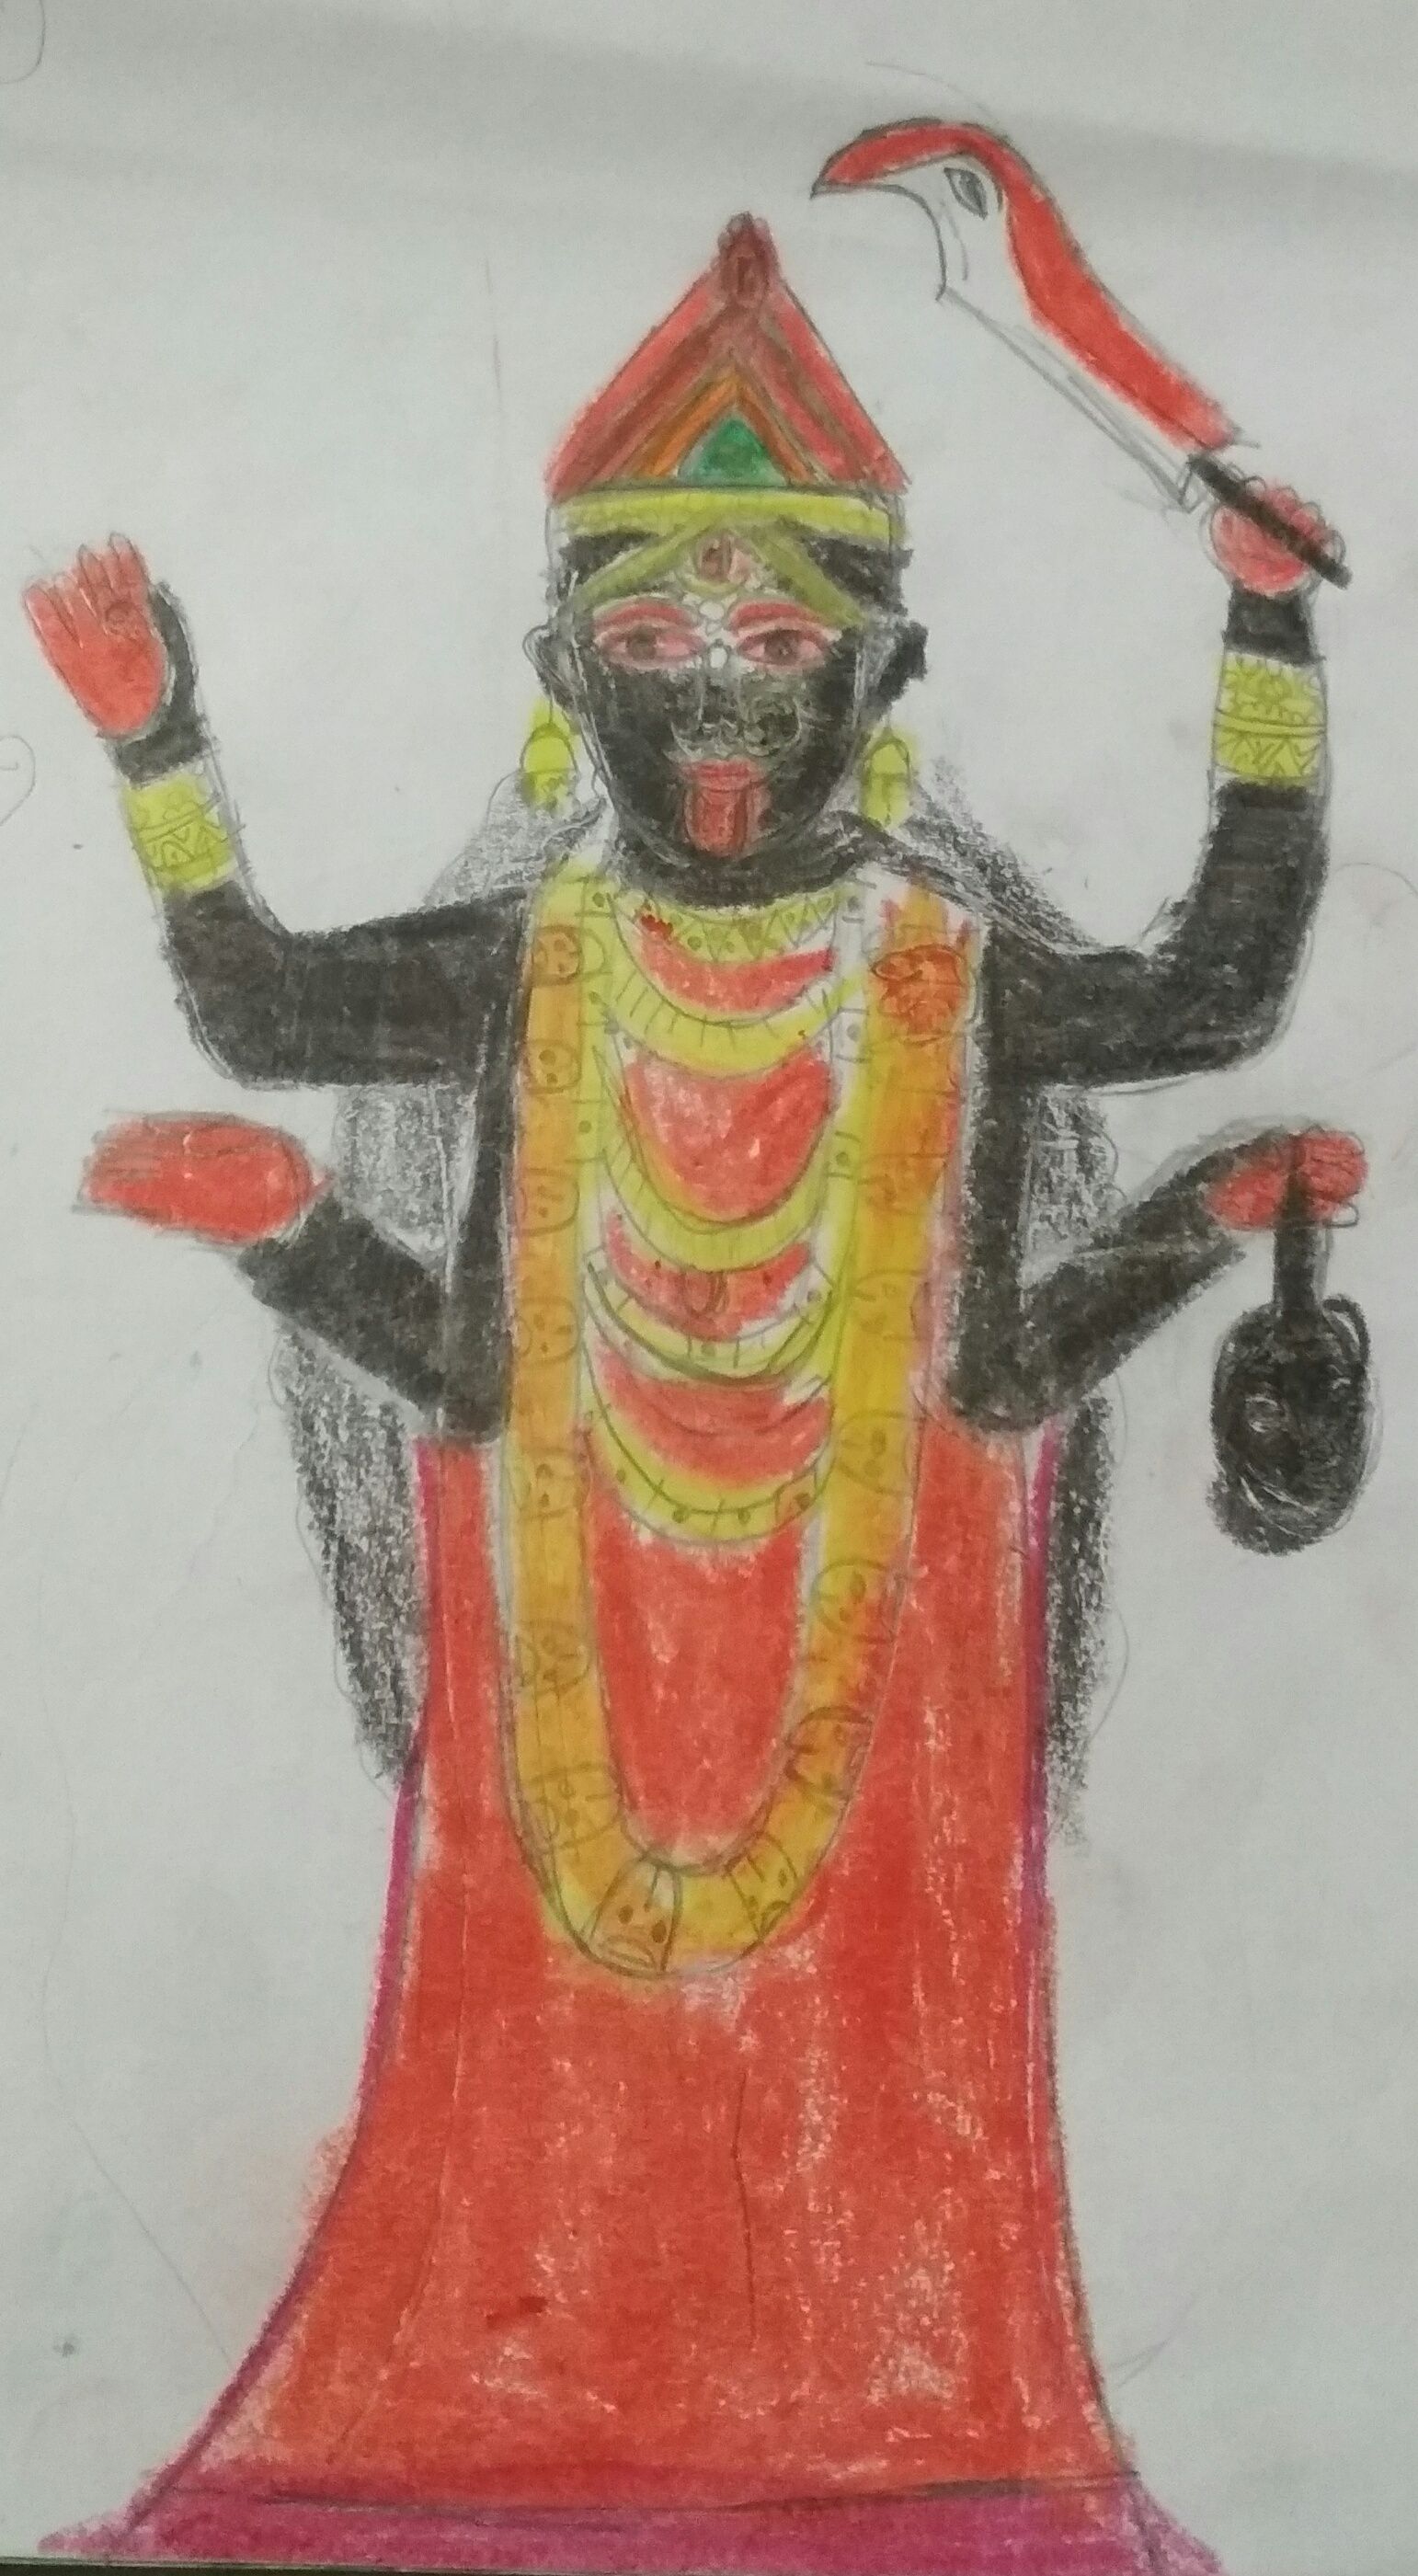 Maa kali face drawing easy step by step/Kali maa face drawing/kali puja  drawing - YouTube